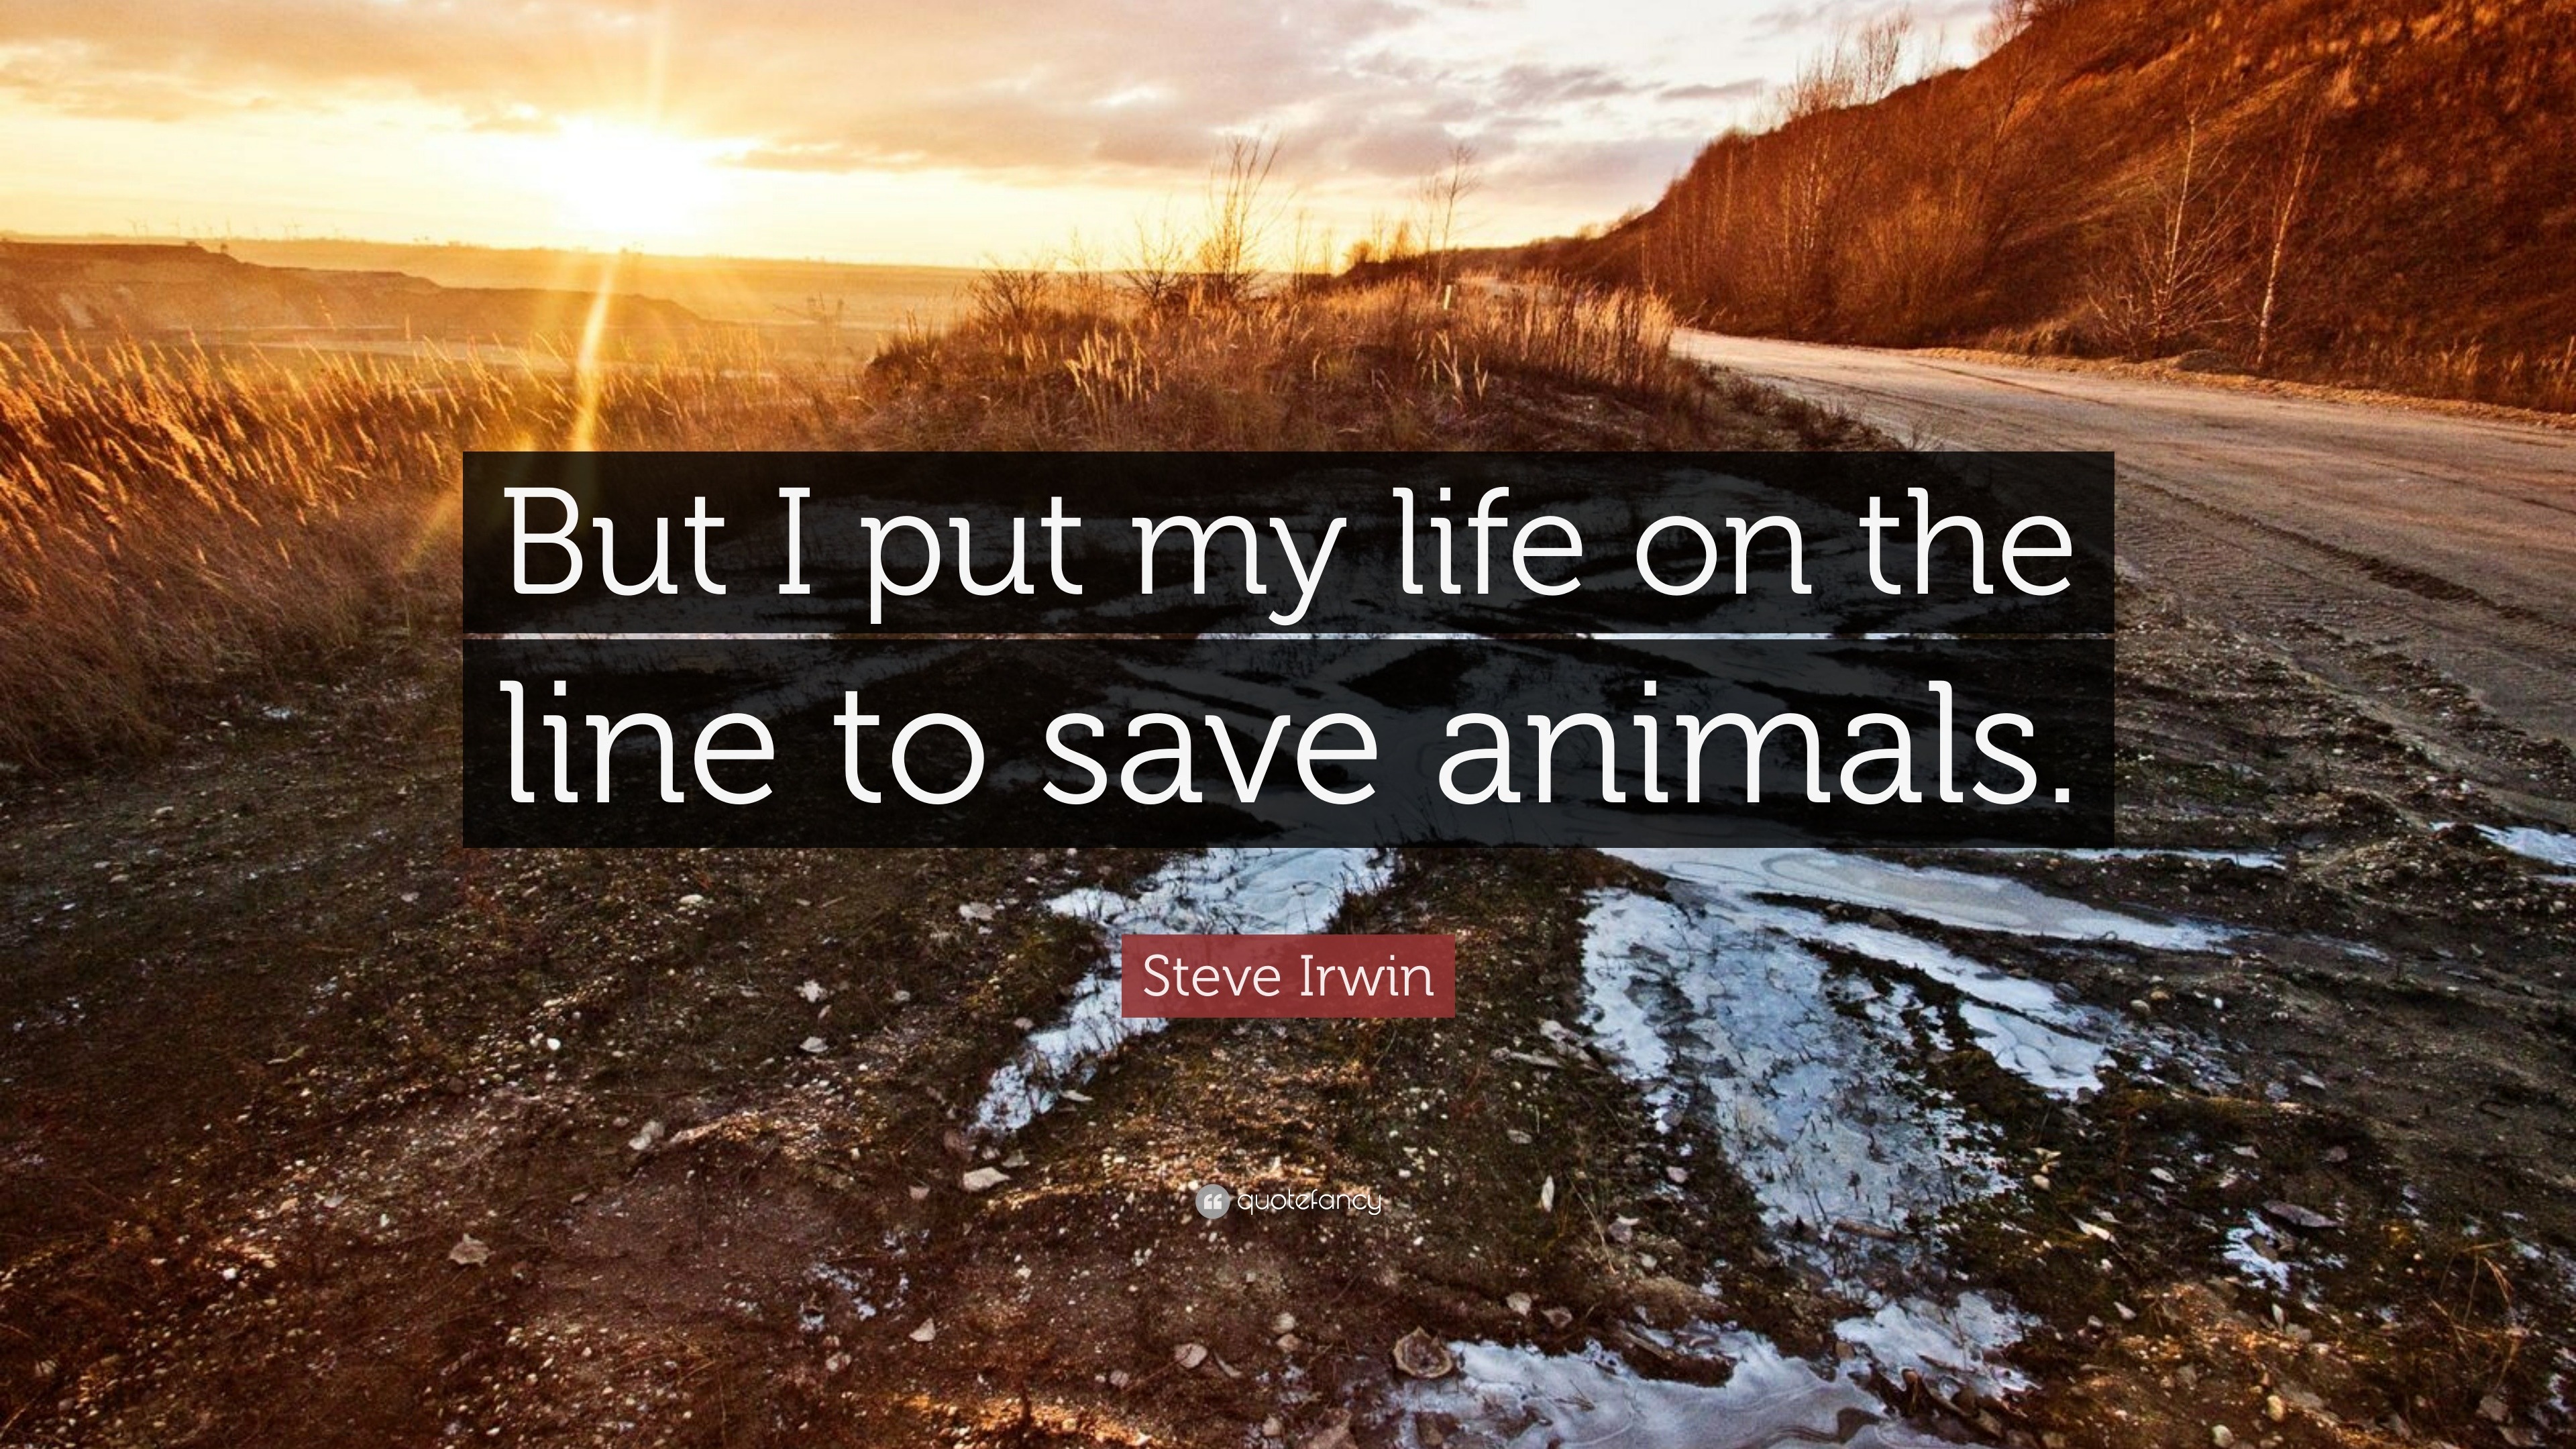 Steve Irwin Quote: “But I put my life on the line to save animals.”